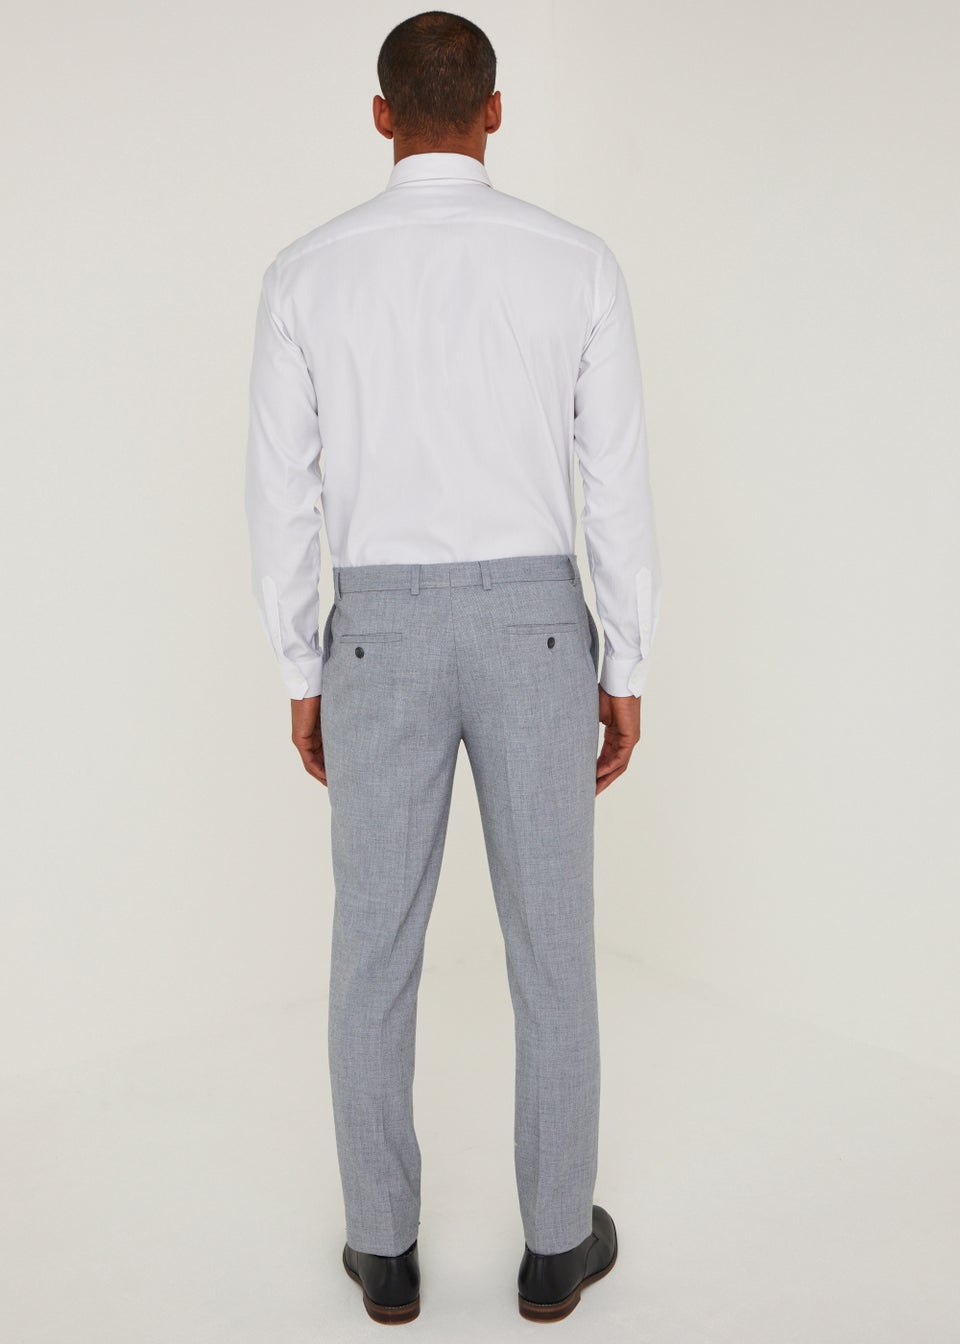 Taylor & Wright Hanks Grey Slim Fit Suit Trousers